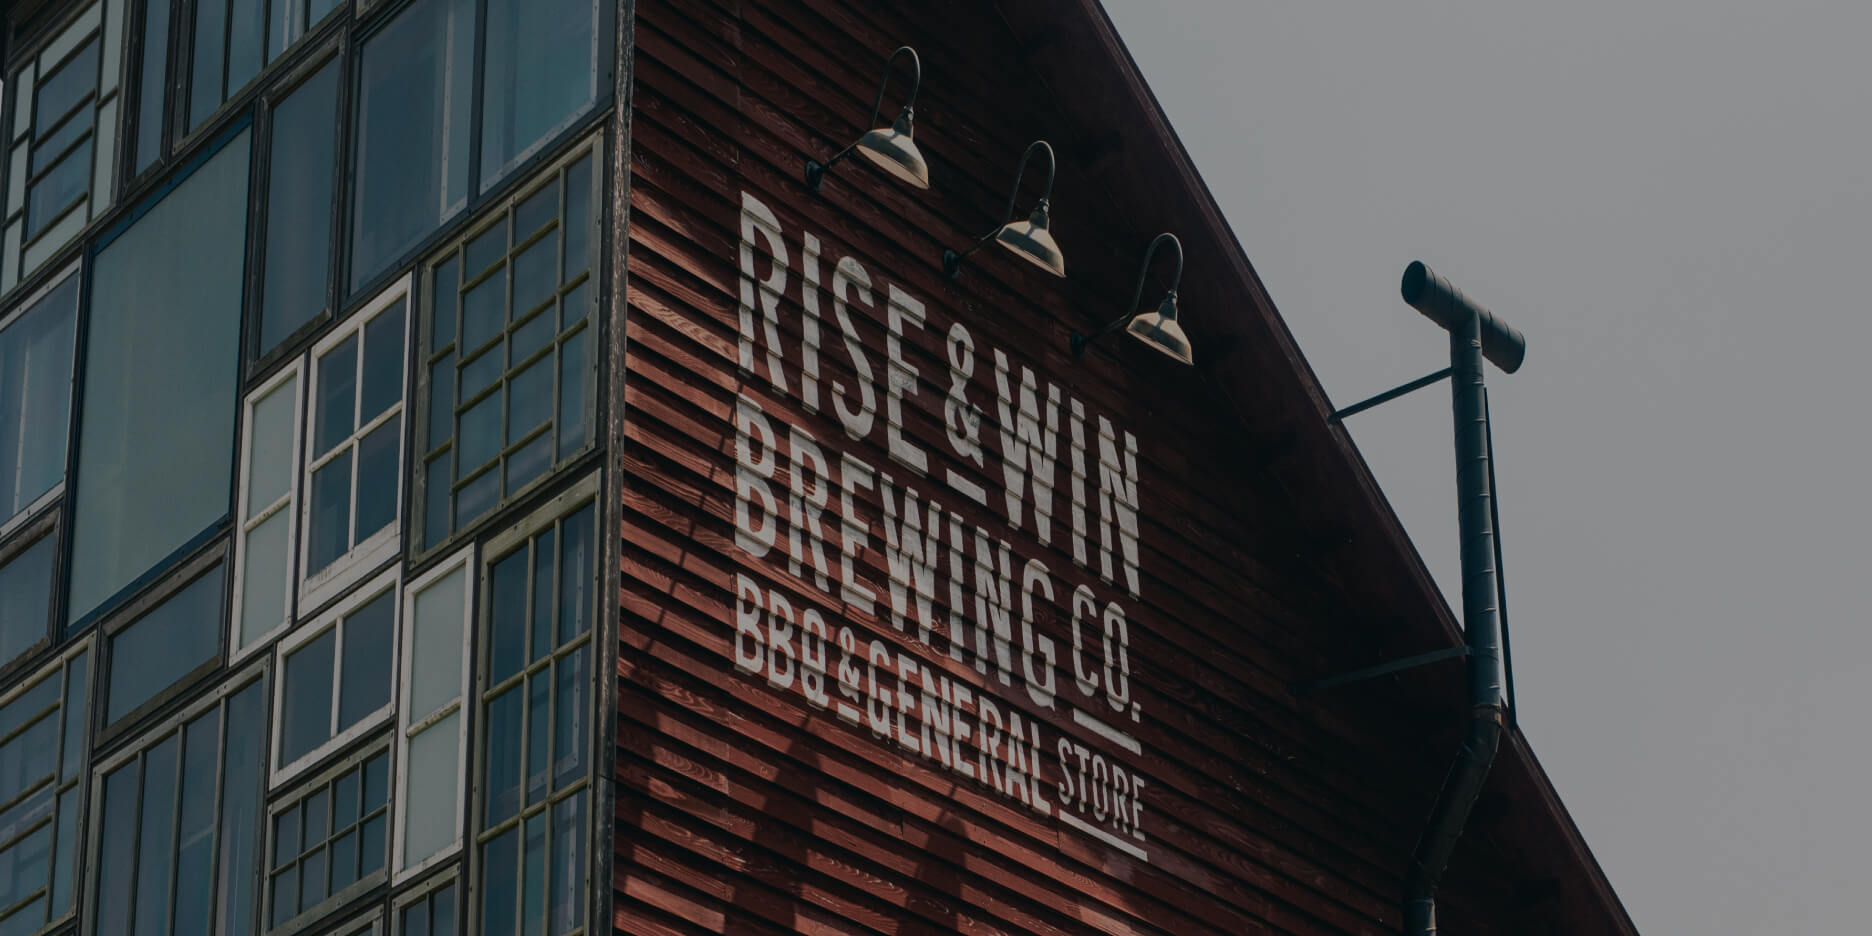 image: RISE & WIN Brewing Co.BBQ & General Store